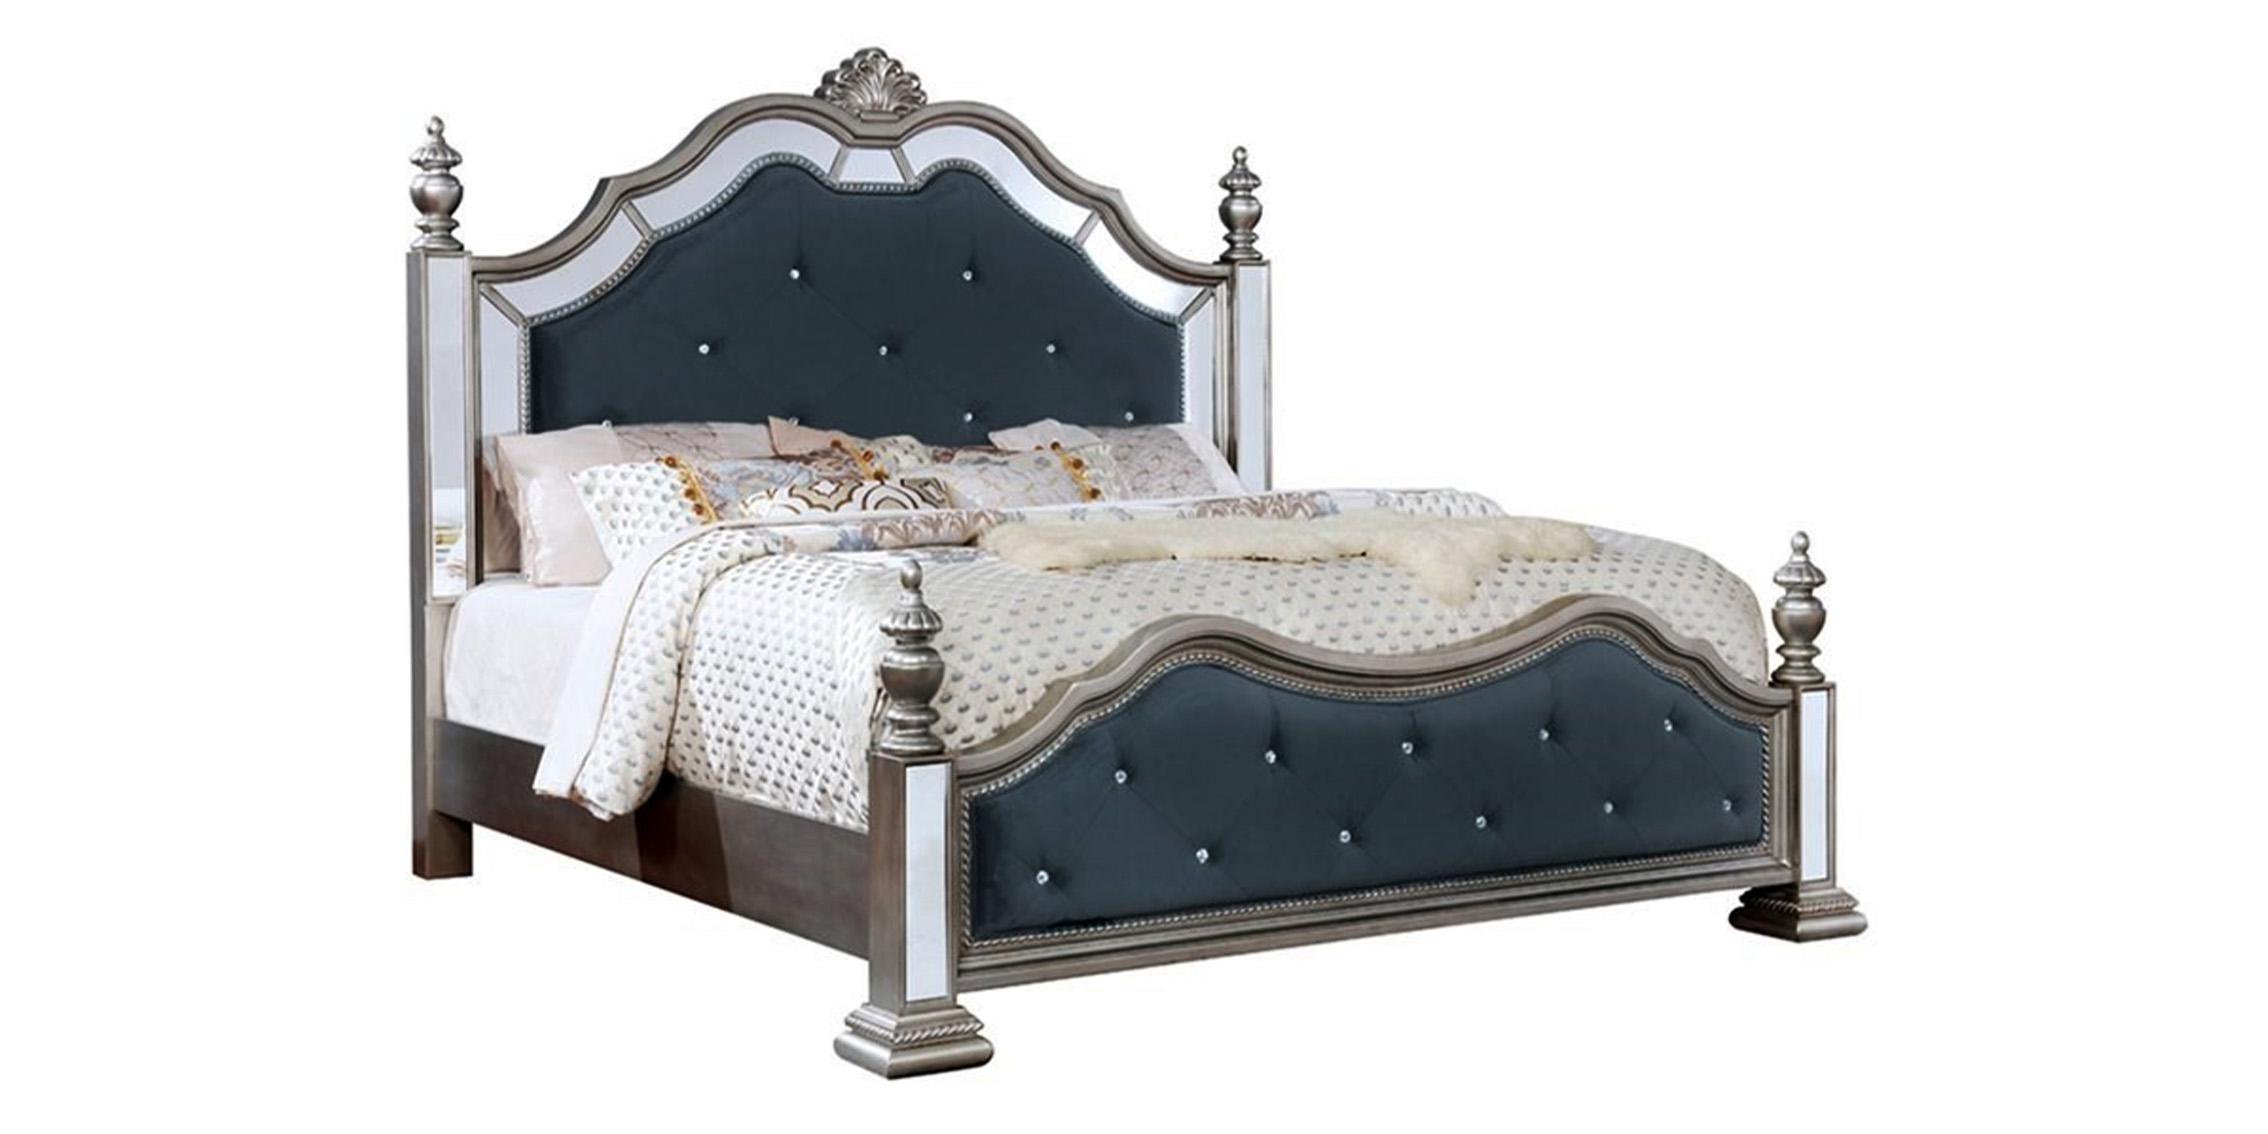 Classic, Traditional Poster Bed B1722 B1722-Q in Antique White, Silver Fabric